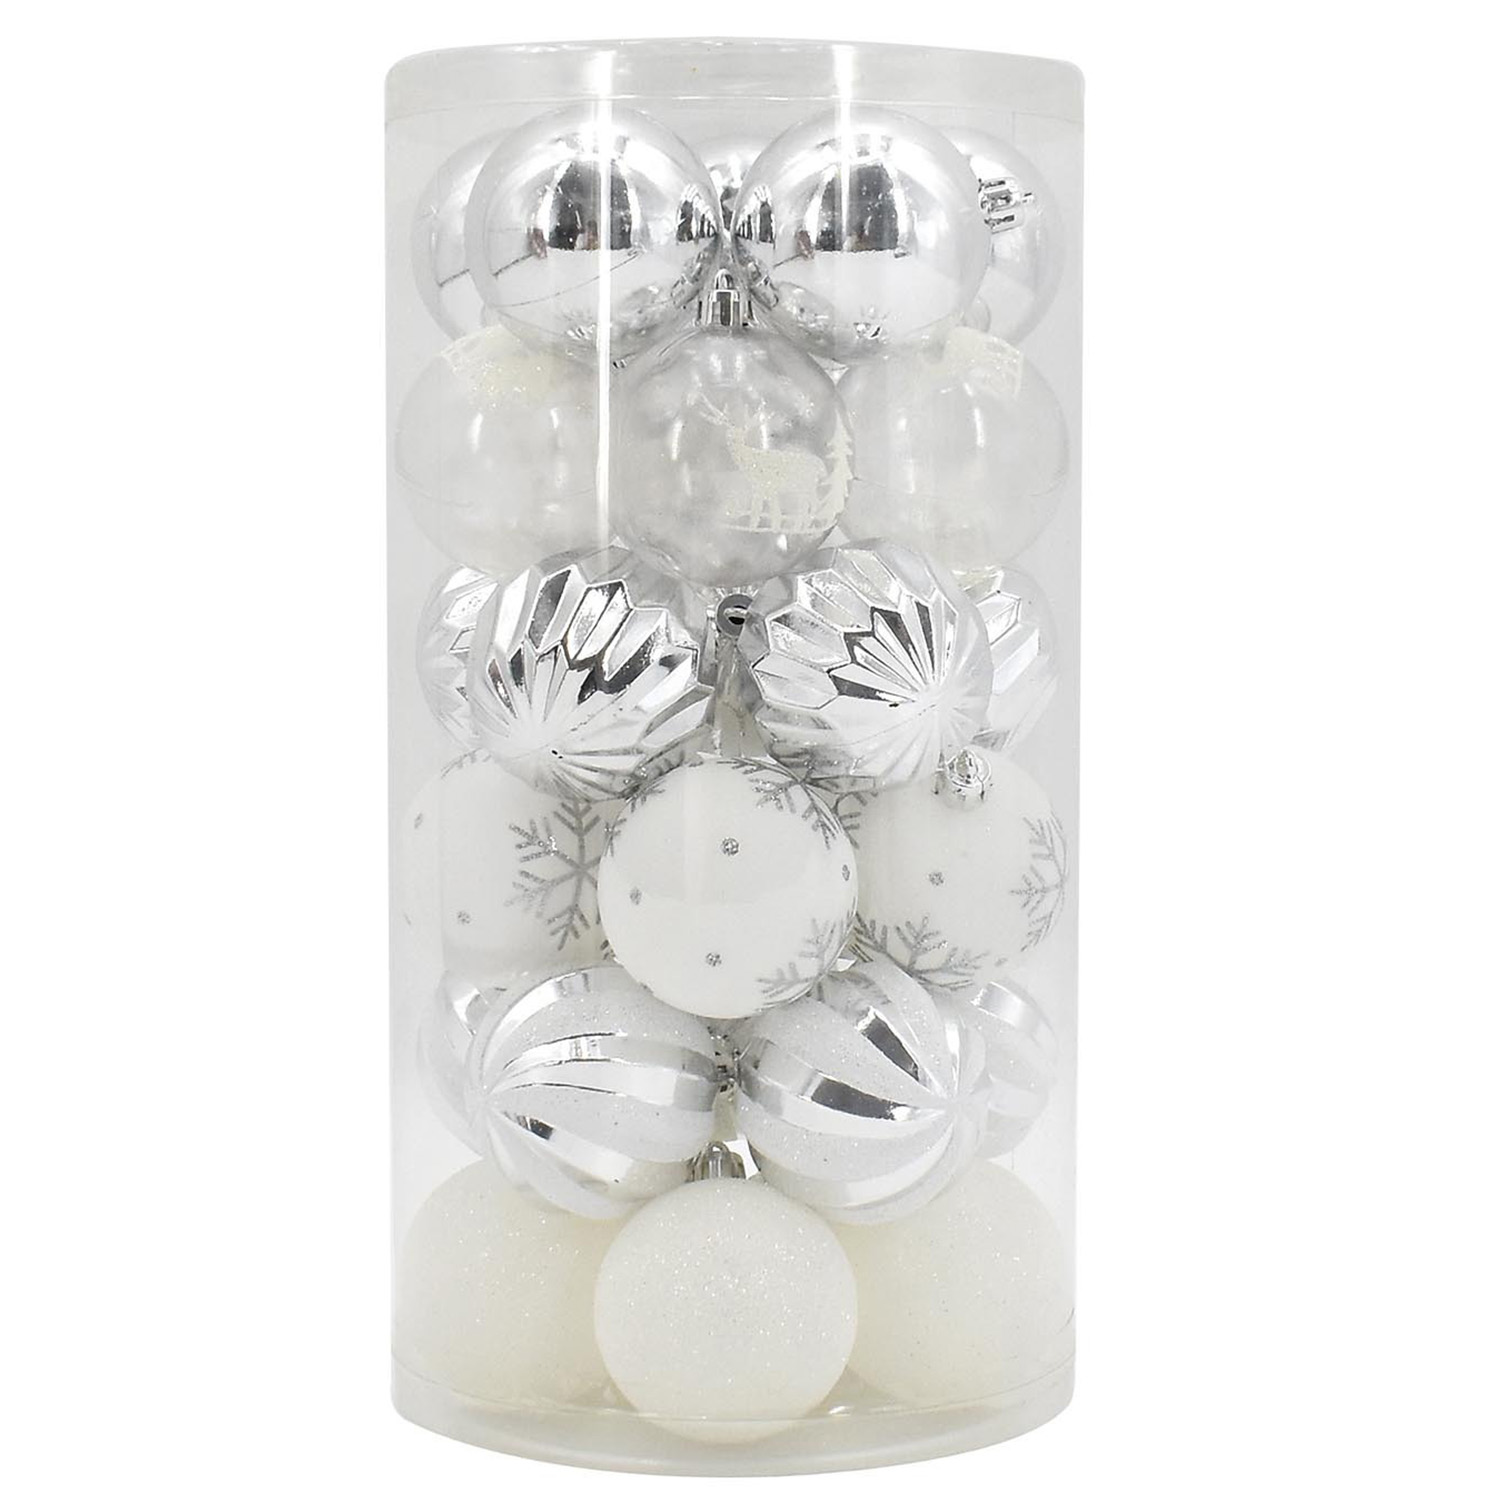 Frosted Fairytale White Baubles 30 Pack Image